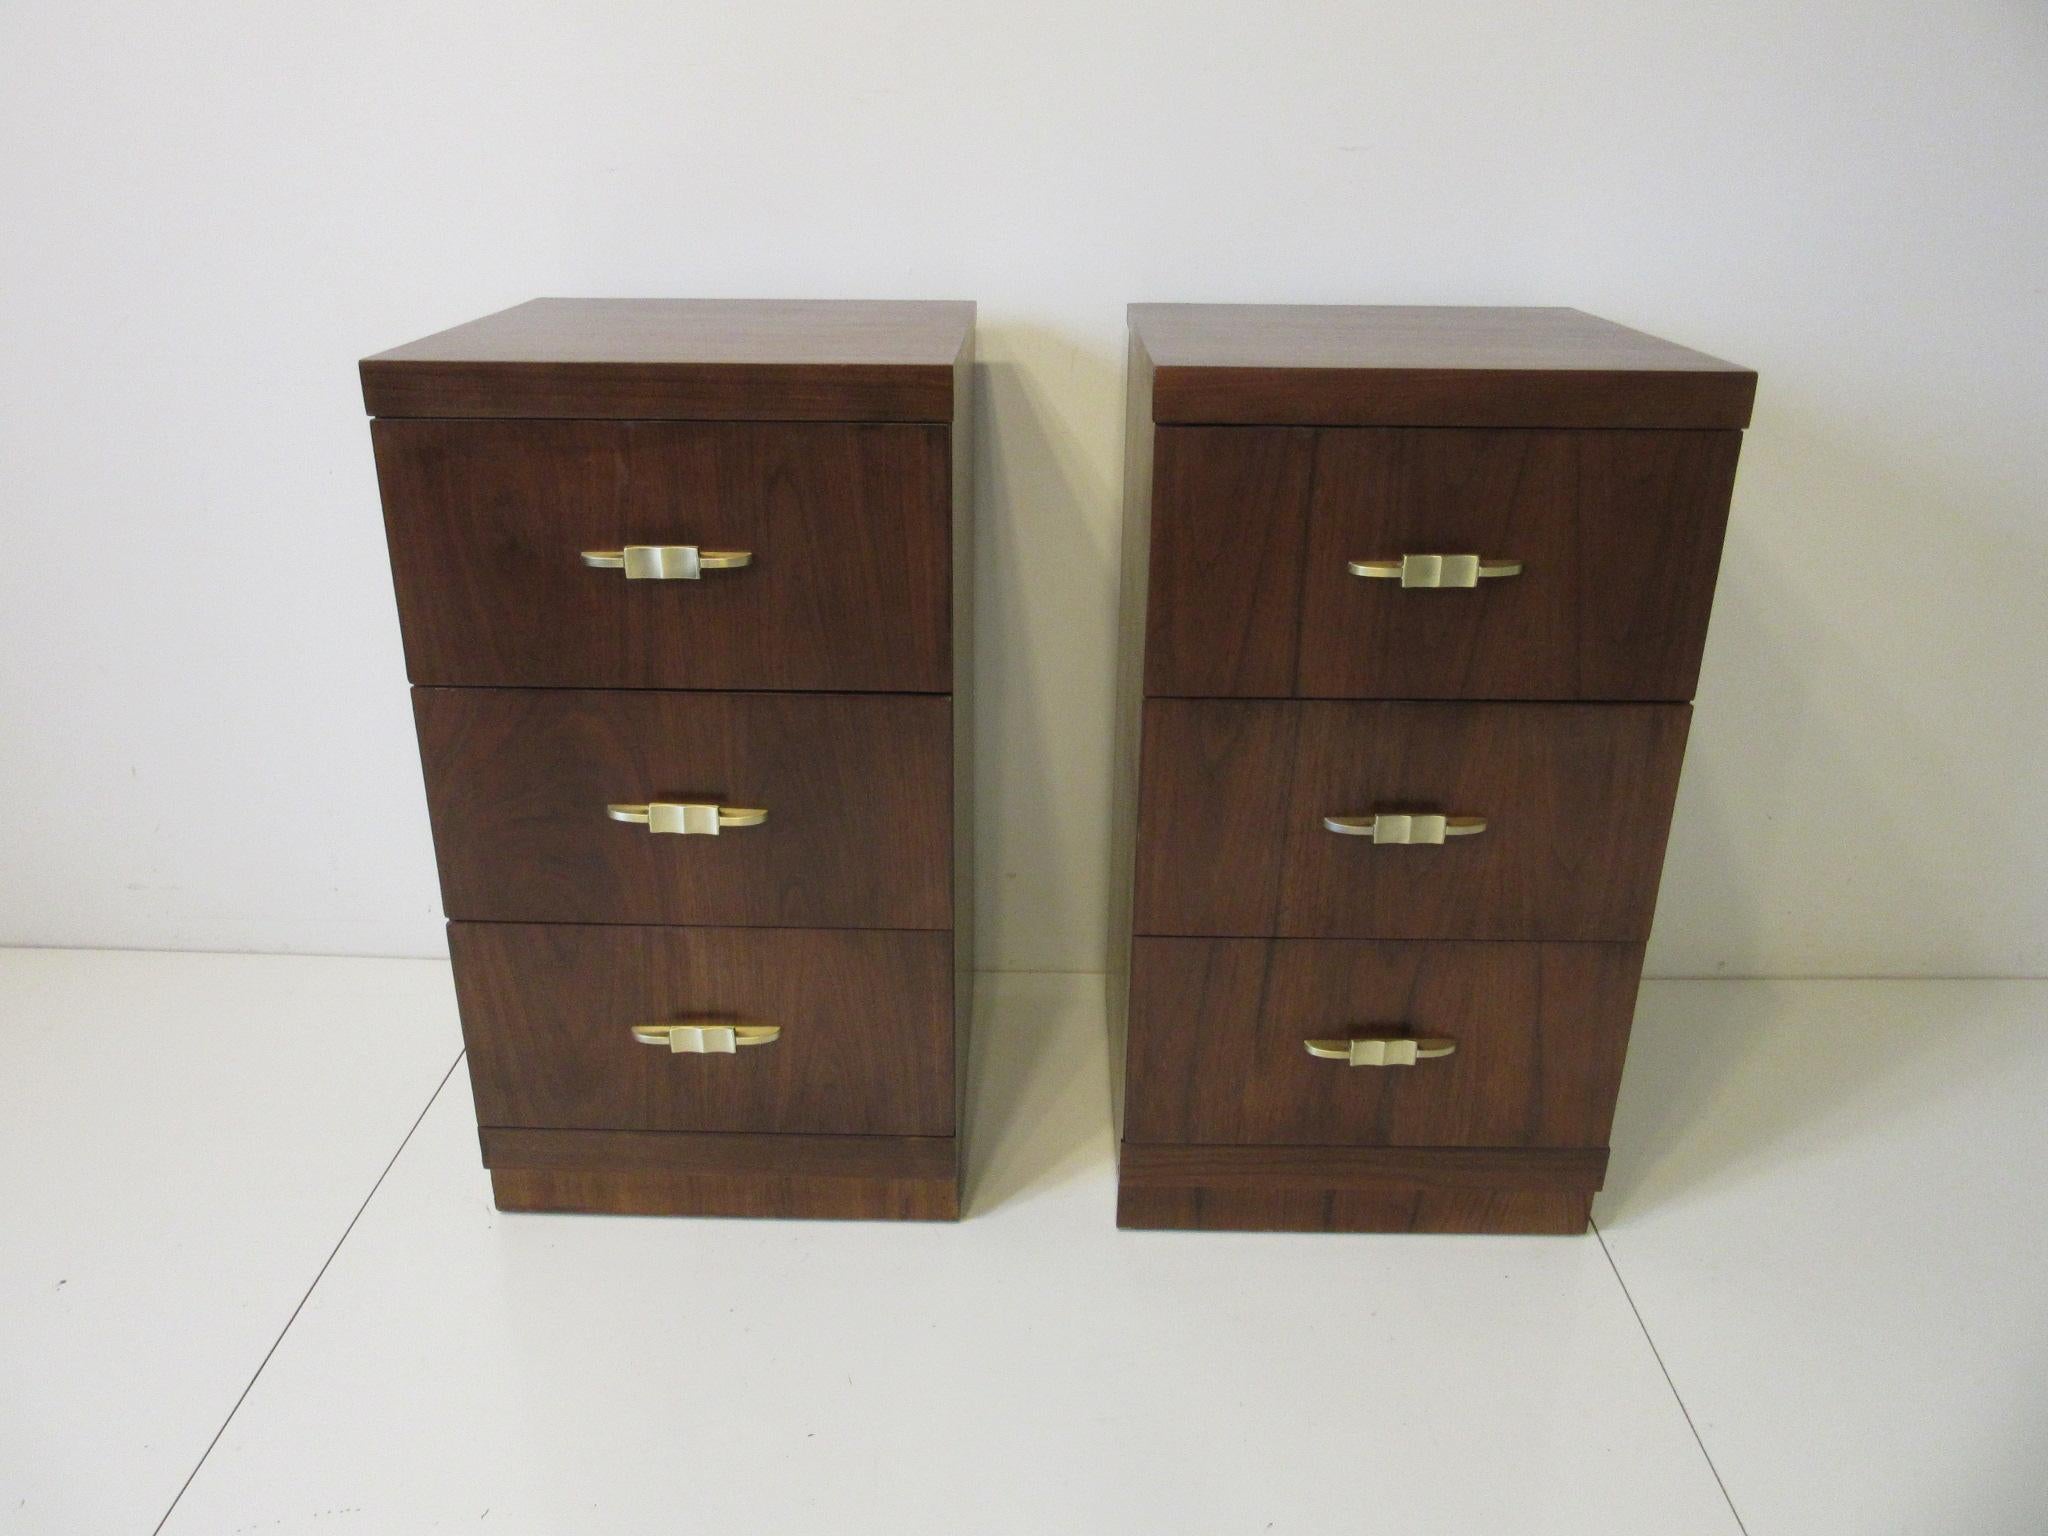 A pair of well grained rosewood three-drawer nightstands with solid cast brass pulls in a taller size perfect for today’s higher pillow top mattress and beds. A simple design that works with deco, streamline or midcentury.